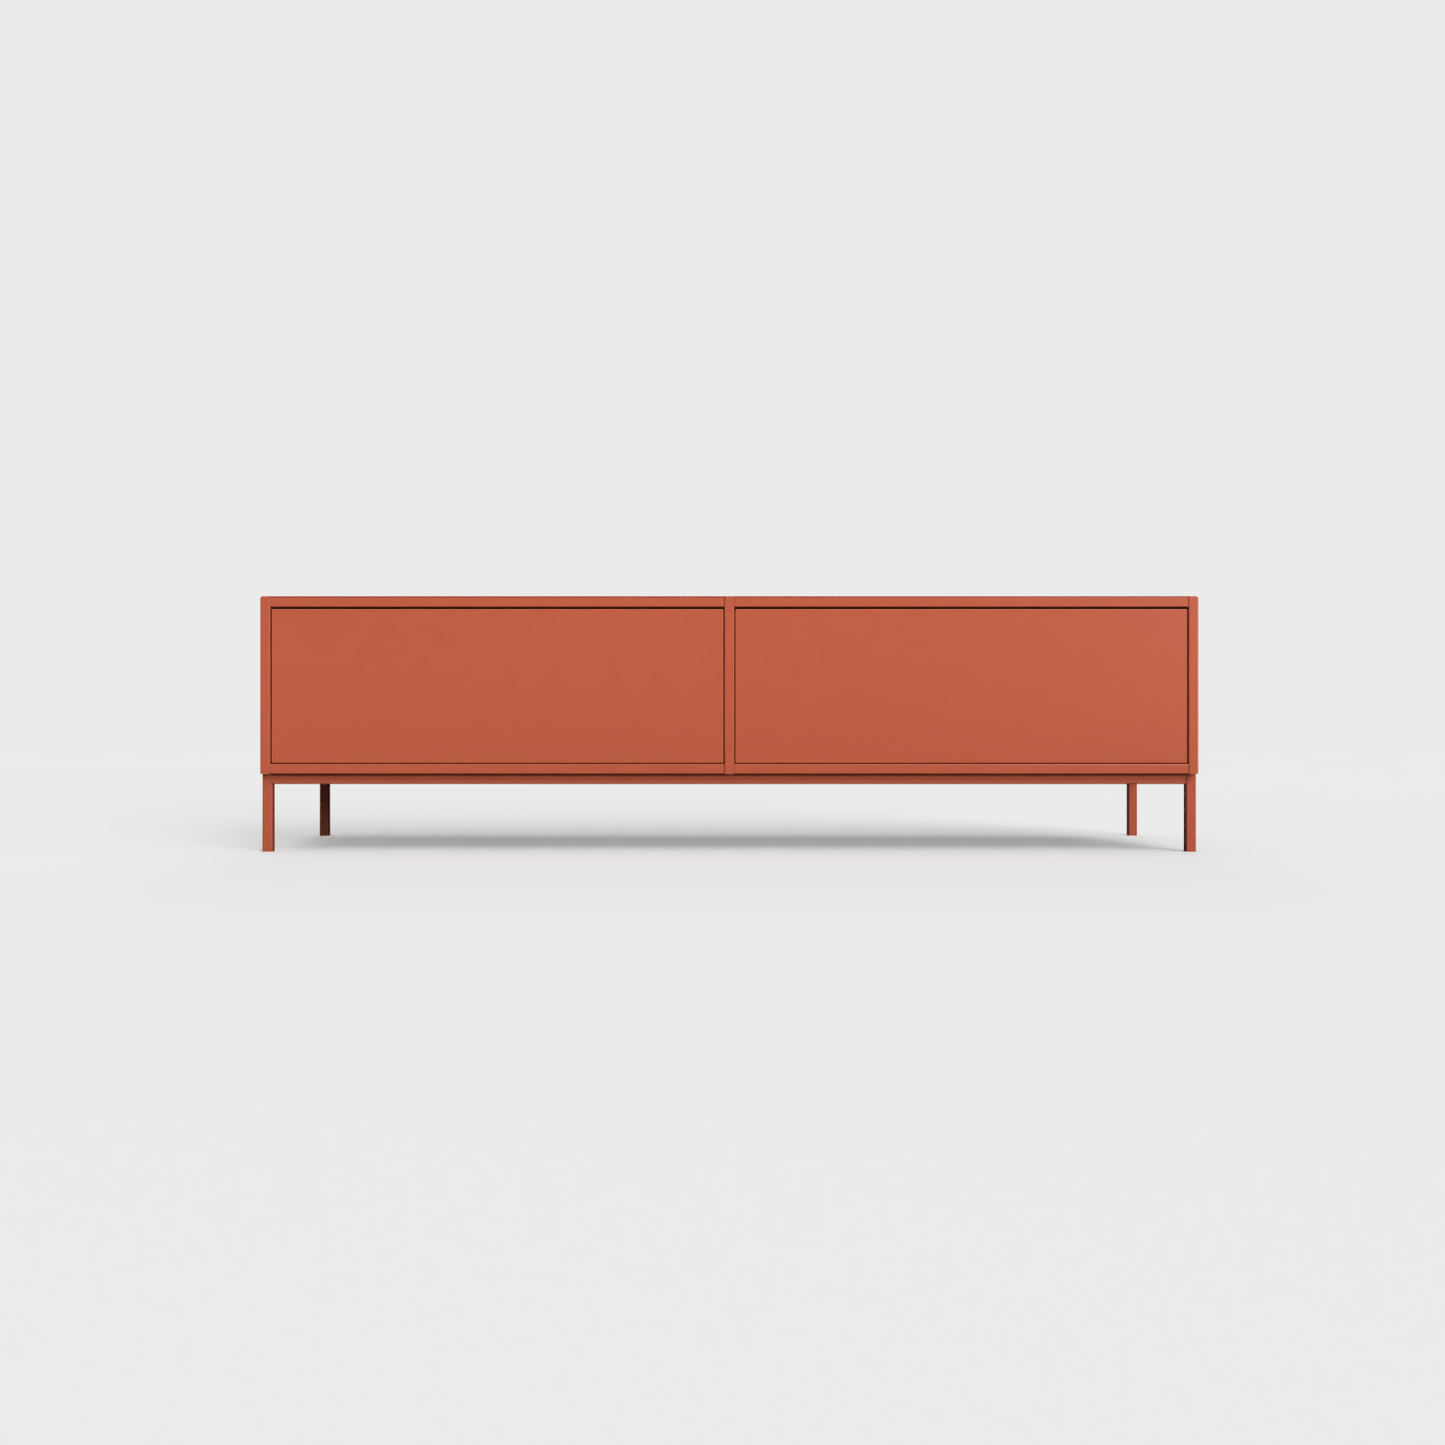 Prunus 01 Lowboard in Brick color, powder-coated steel, elegant and modern piece of furniture for your living room